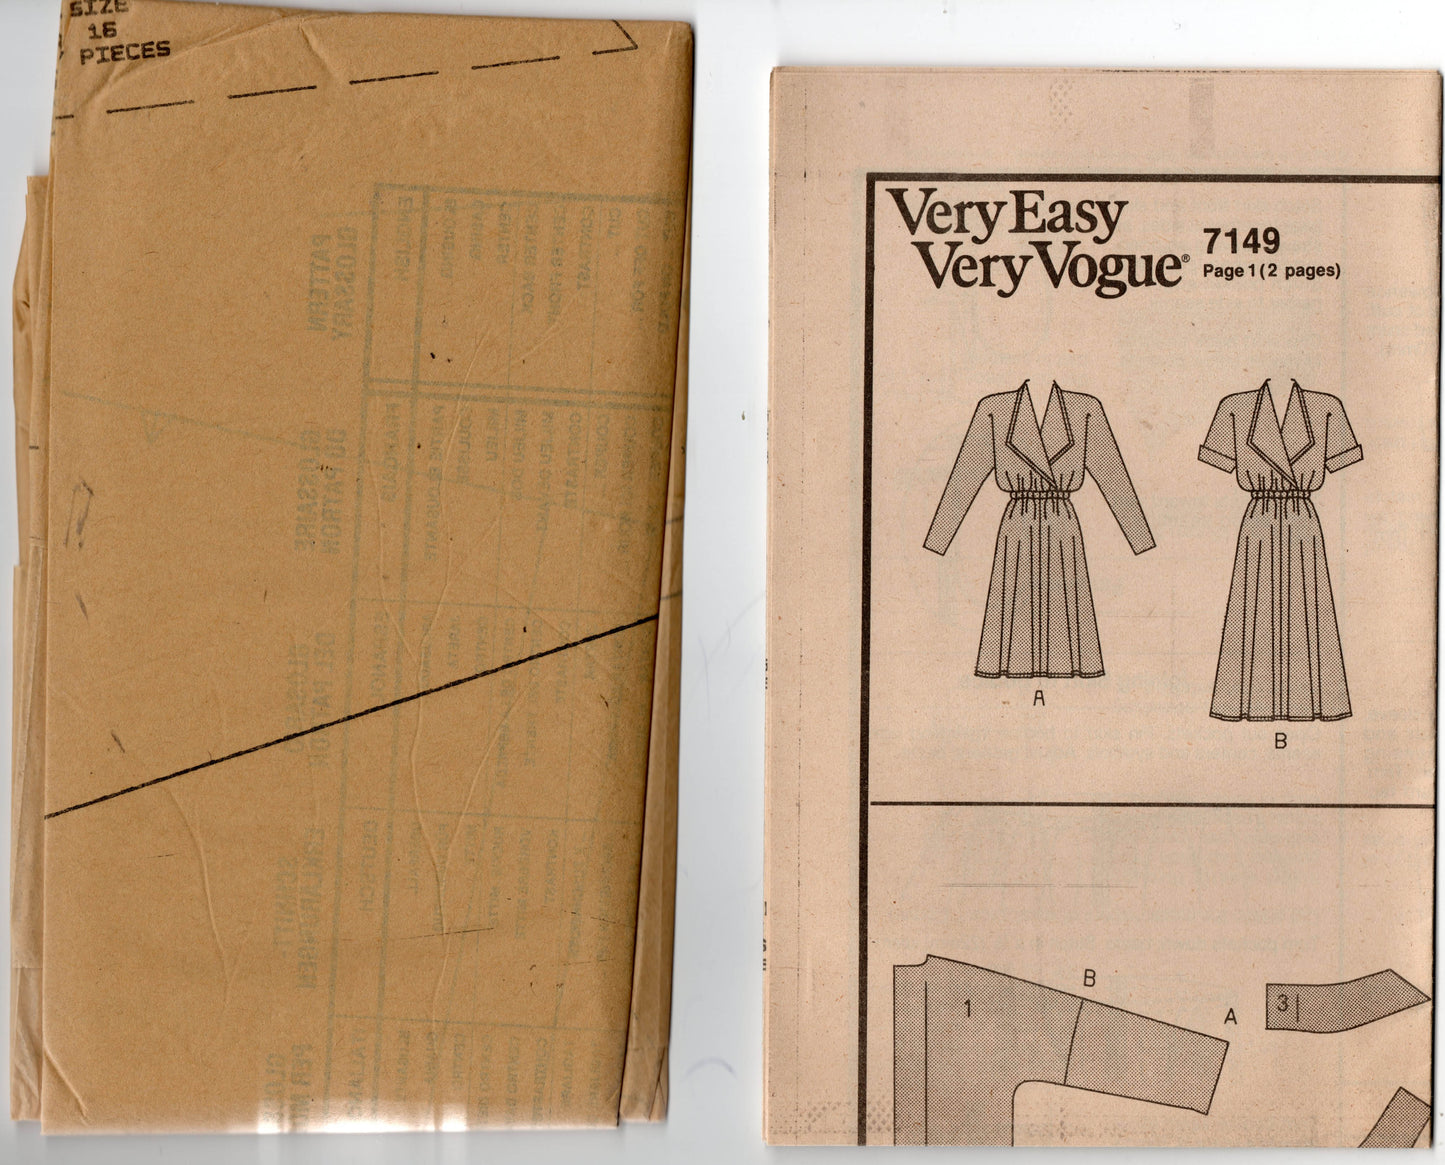 Very Easy Vogue Career 7149 Womens Fit & Flared Dress 1980s Vintage Sewing Pattern Size 14 - 18 UNCUT Factory Folded